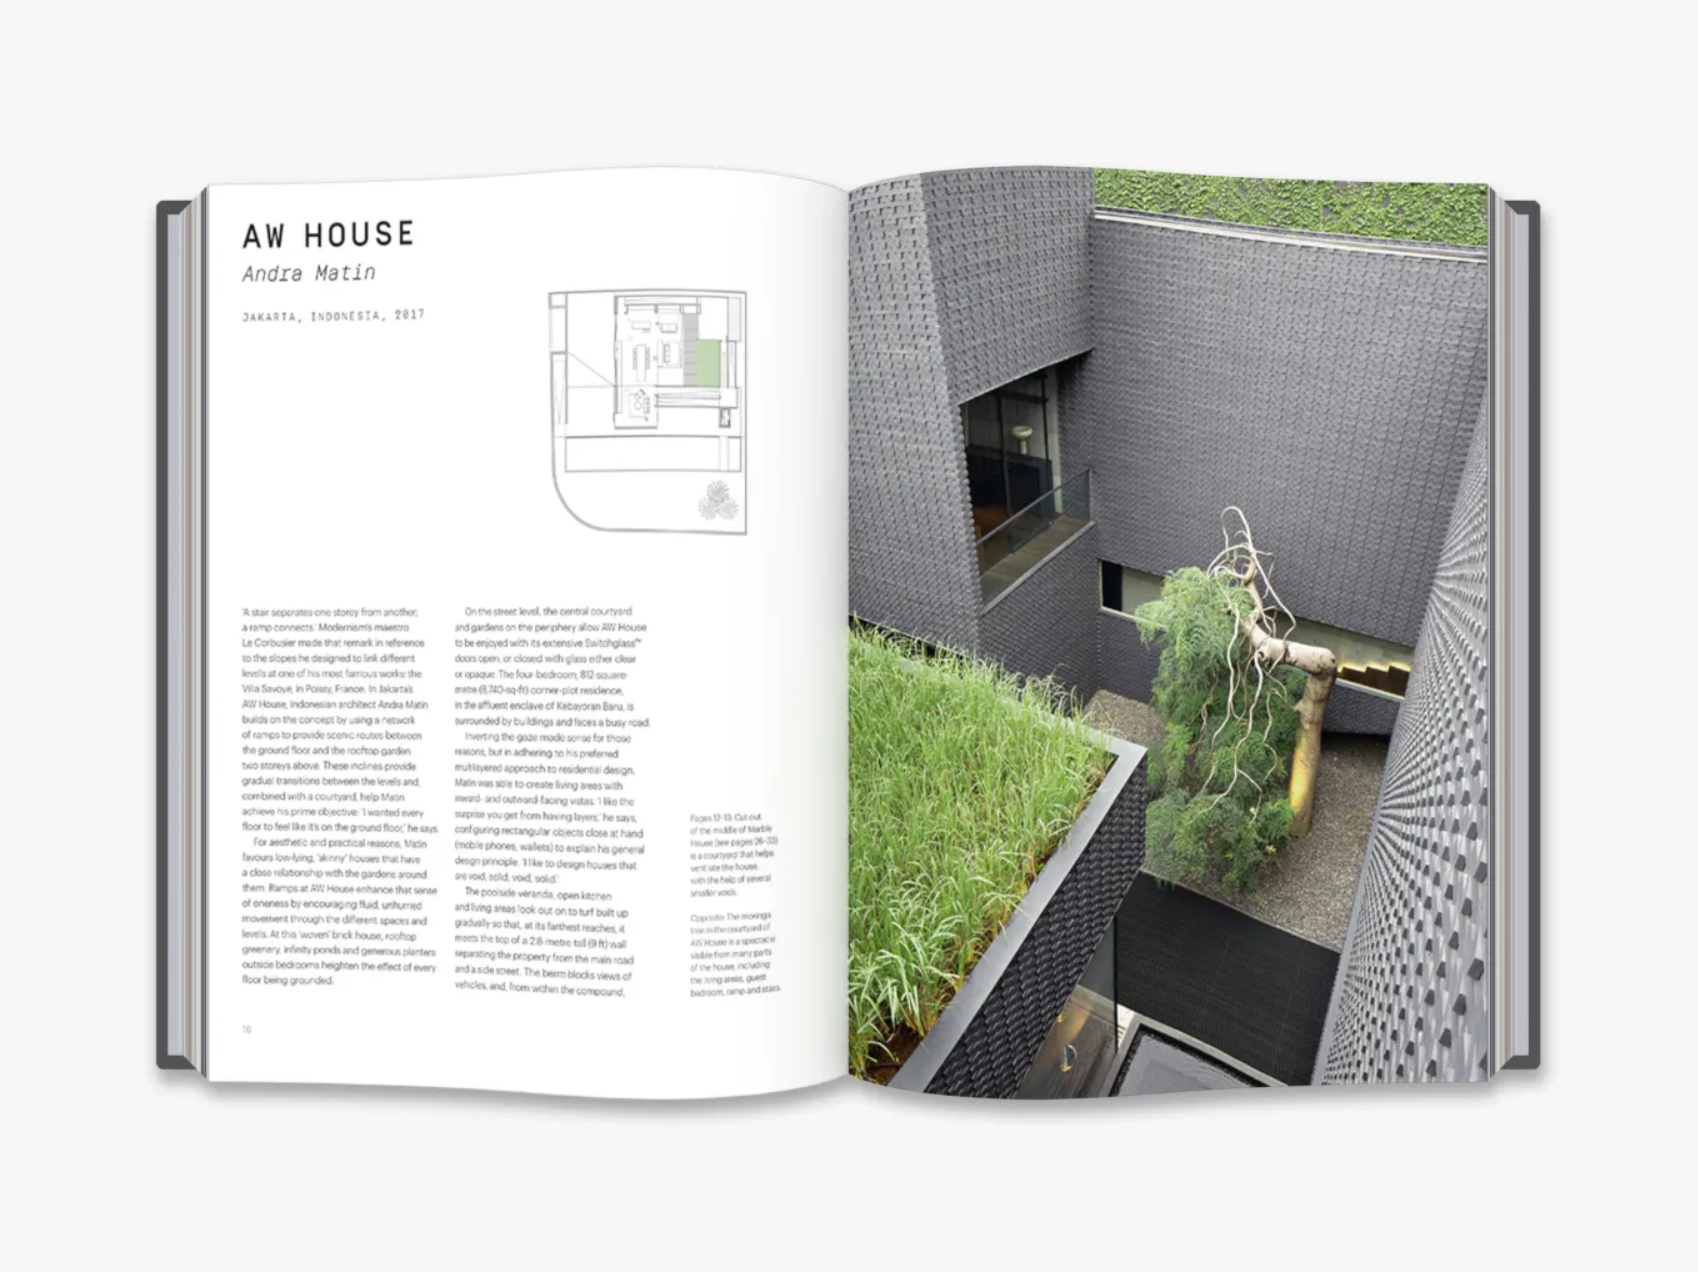  Courtyard Living : Contemporary Houses of the Asia-Pacific_Charmaine Chan_9780500519202_Thames & Hudson Ltd 